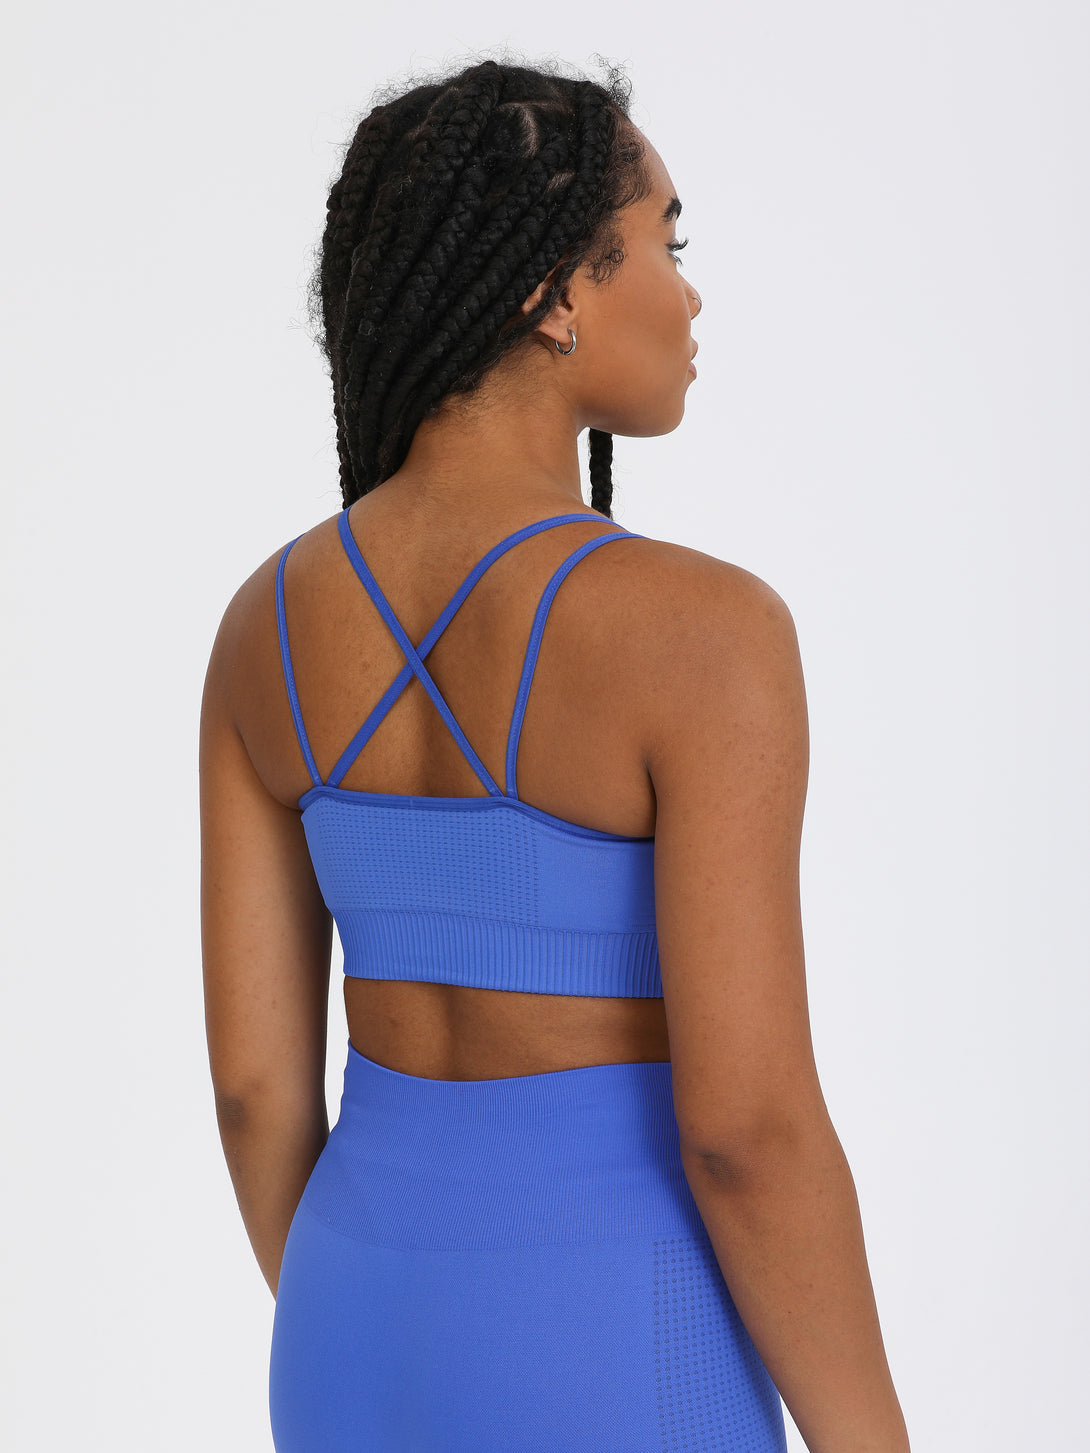 A Woman Wearing Amparo Blue Color Seamless Light Support Sports Bra